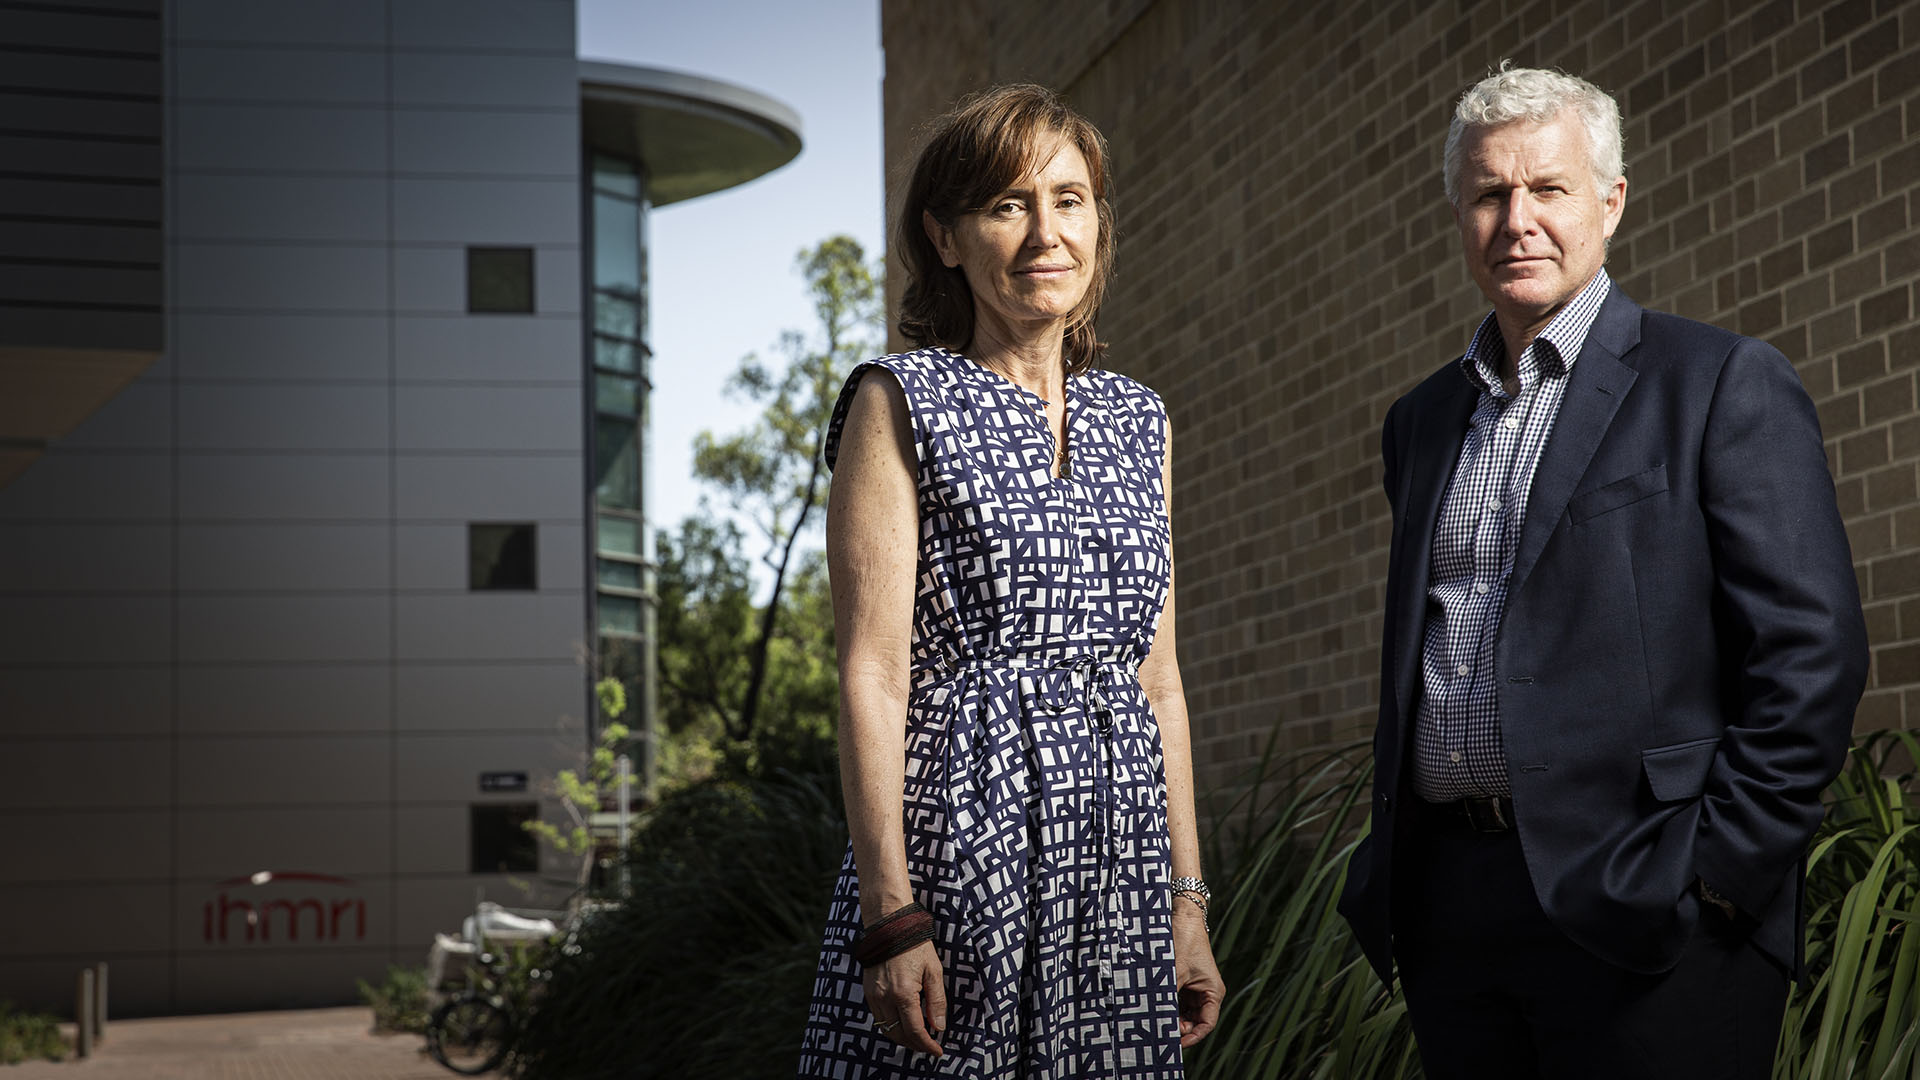 Professor Marie Ranson from the School of Chemistry and Molecular Bioscience and Associate Professor Bruce Ashford from the School of Medicine